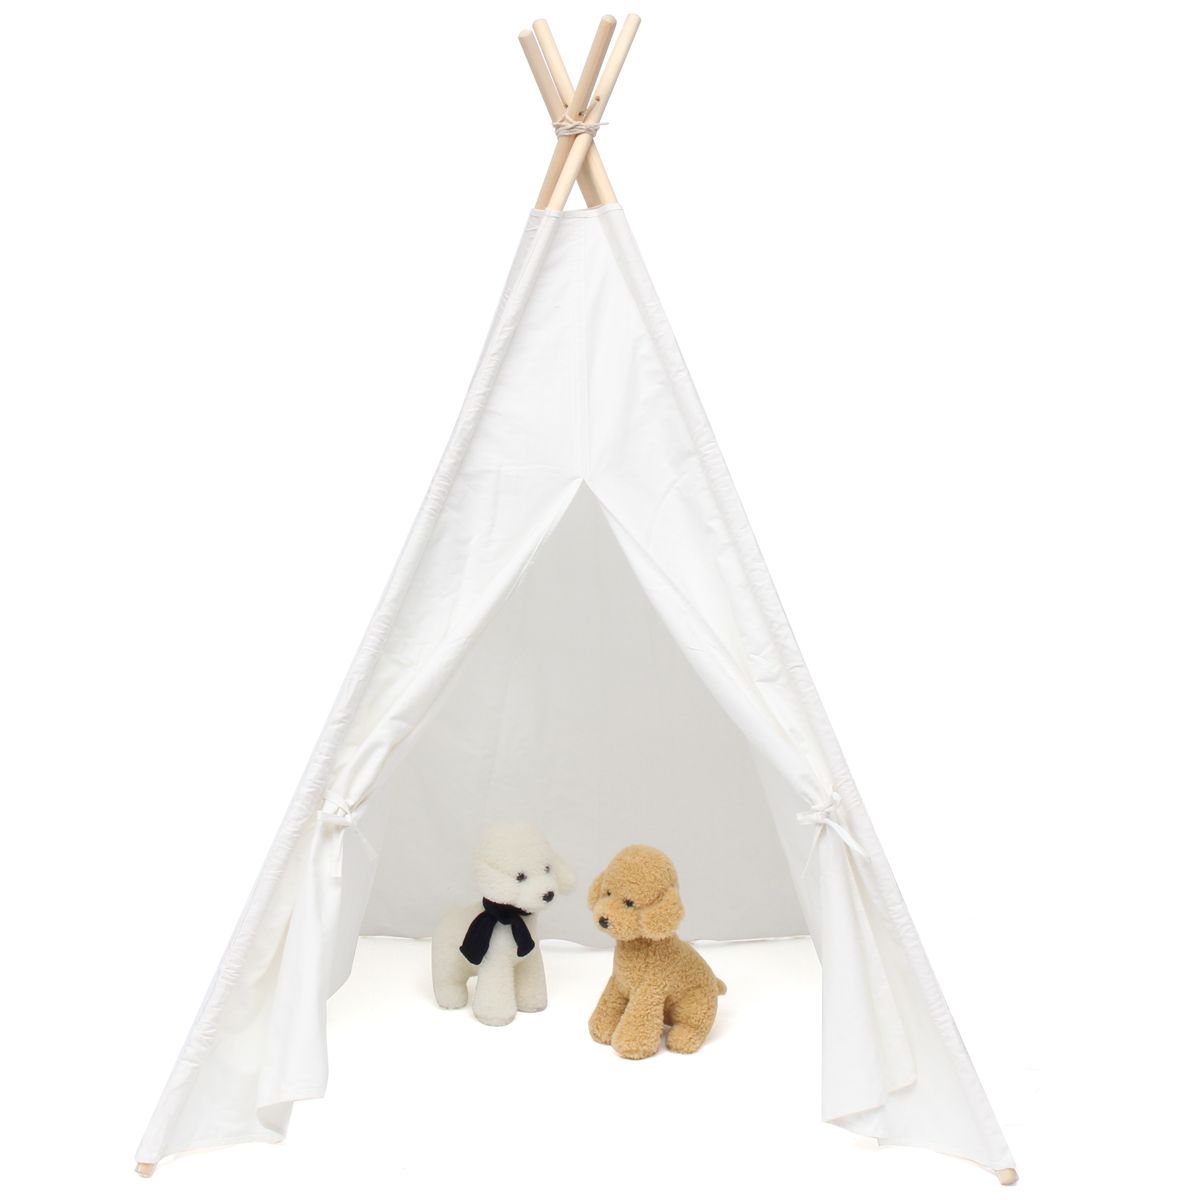 120x120x150cm-White-Canvas-Kids-Teepee-Children-Home-Game-Toy-Play-Tent-Cubby-1352995